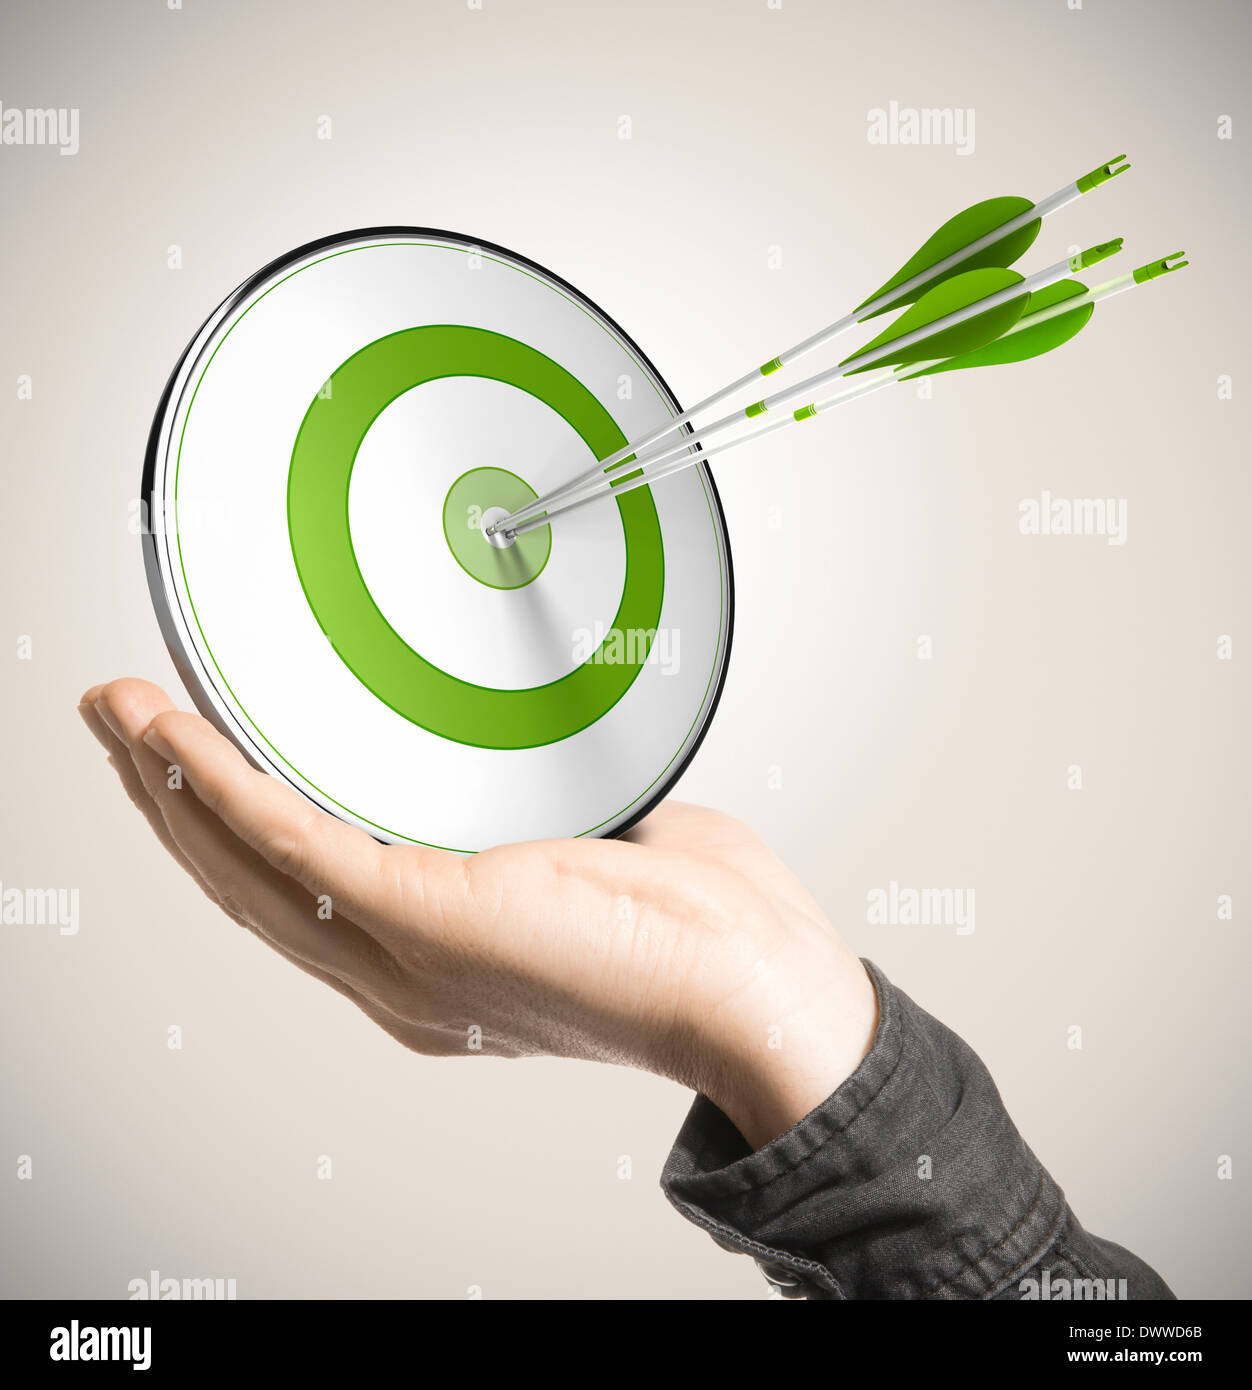 Hand holding a green target with three arrows hitting the center over beige background. Business performance concept. Stock Photo